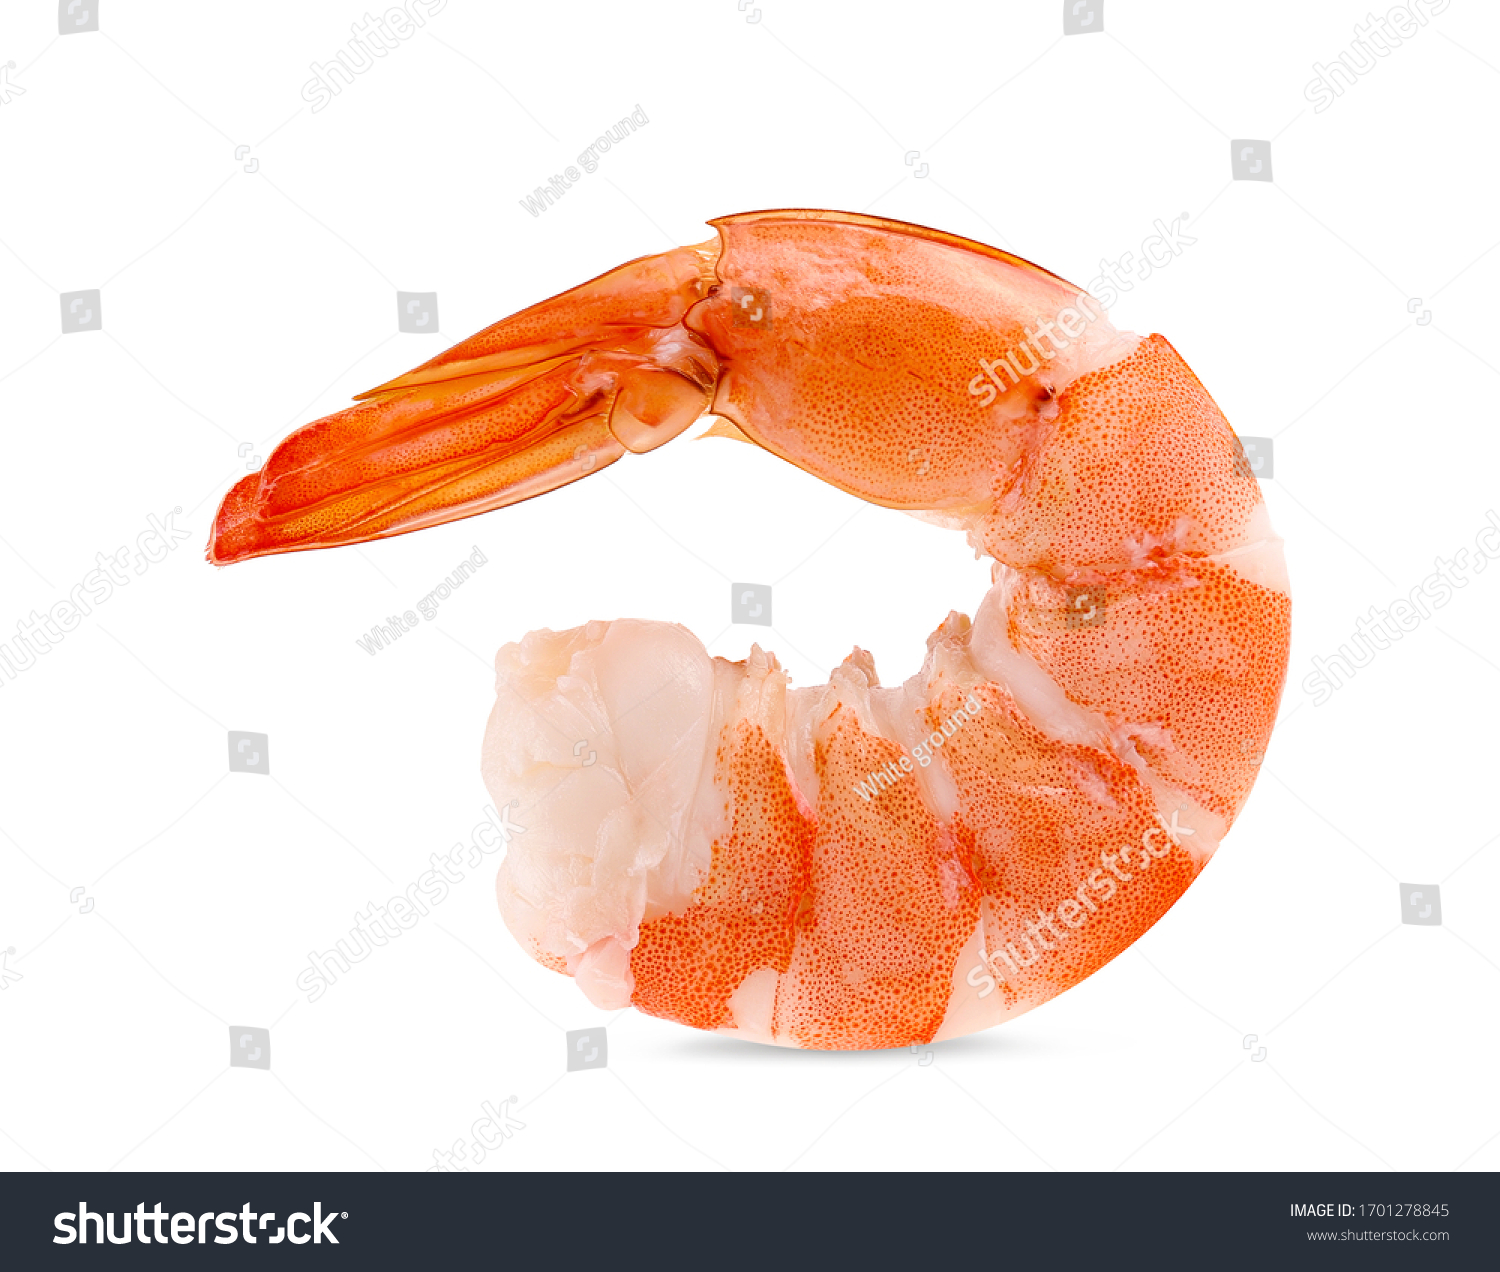 shrimps isolated on a white background. vannamei  #1701278845